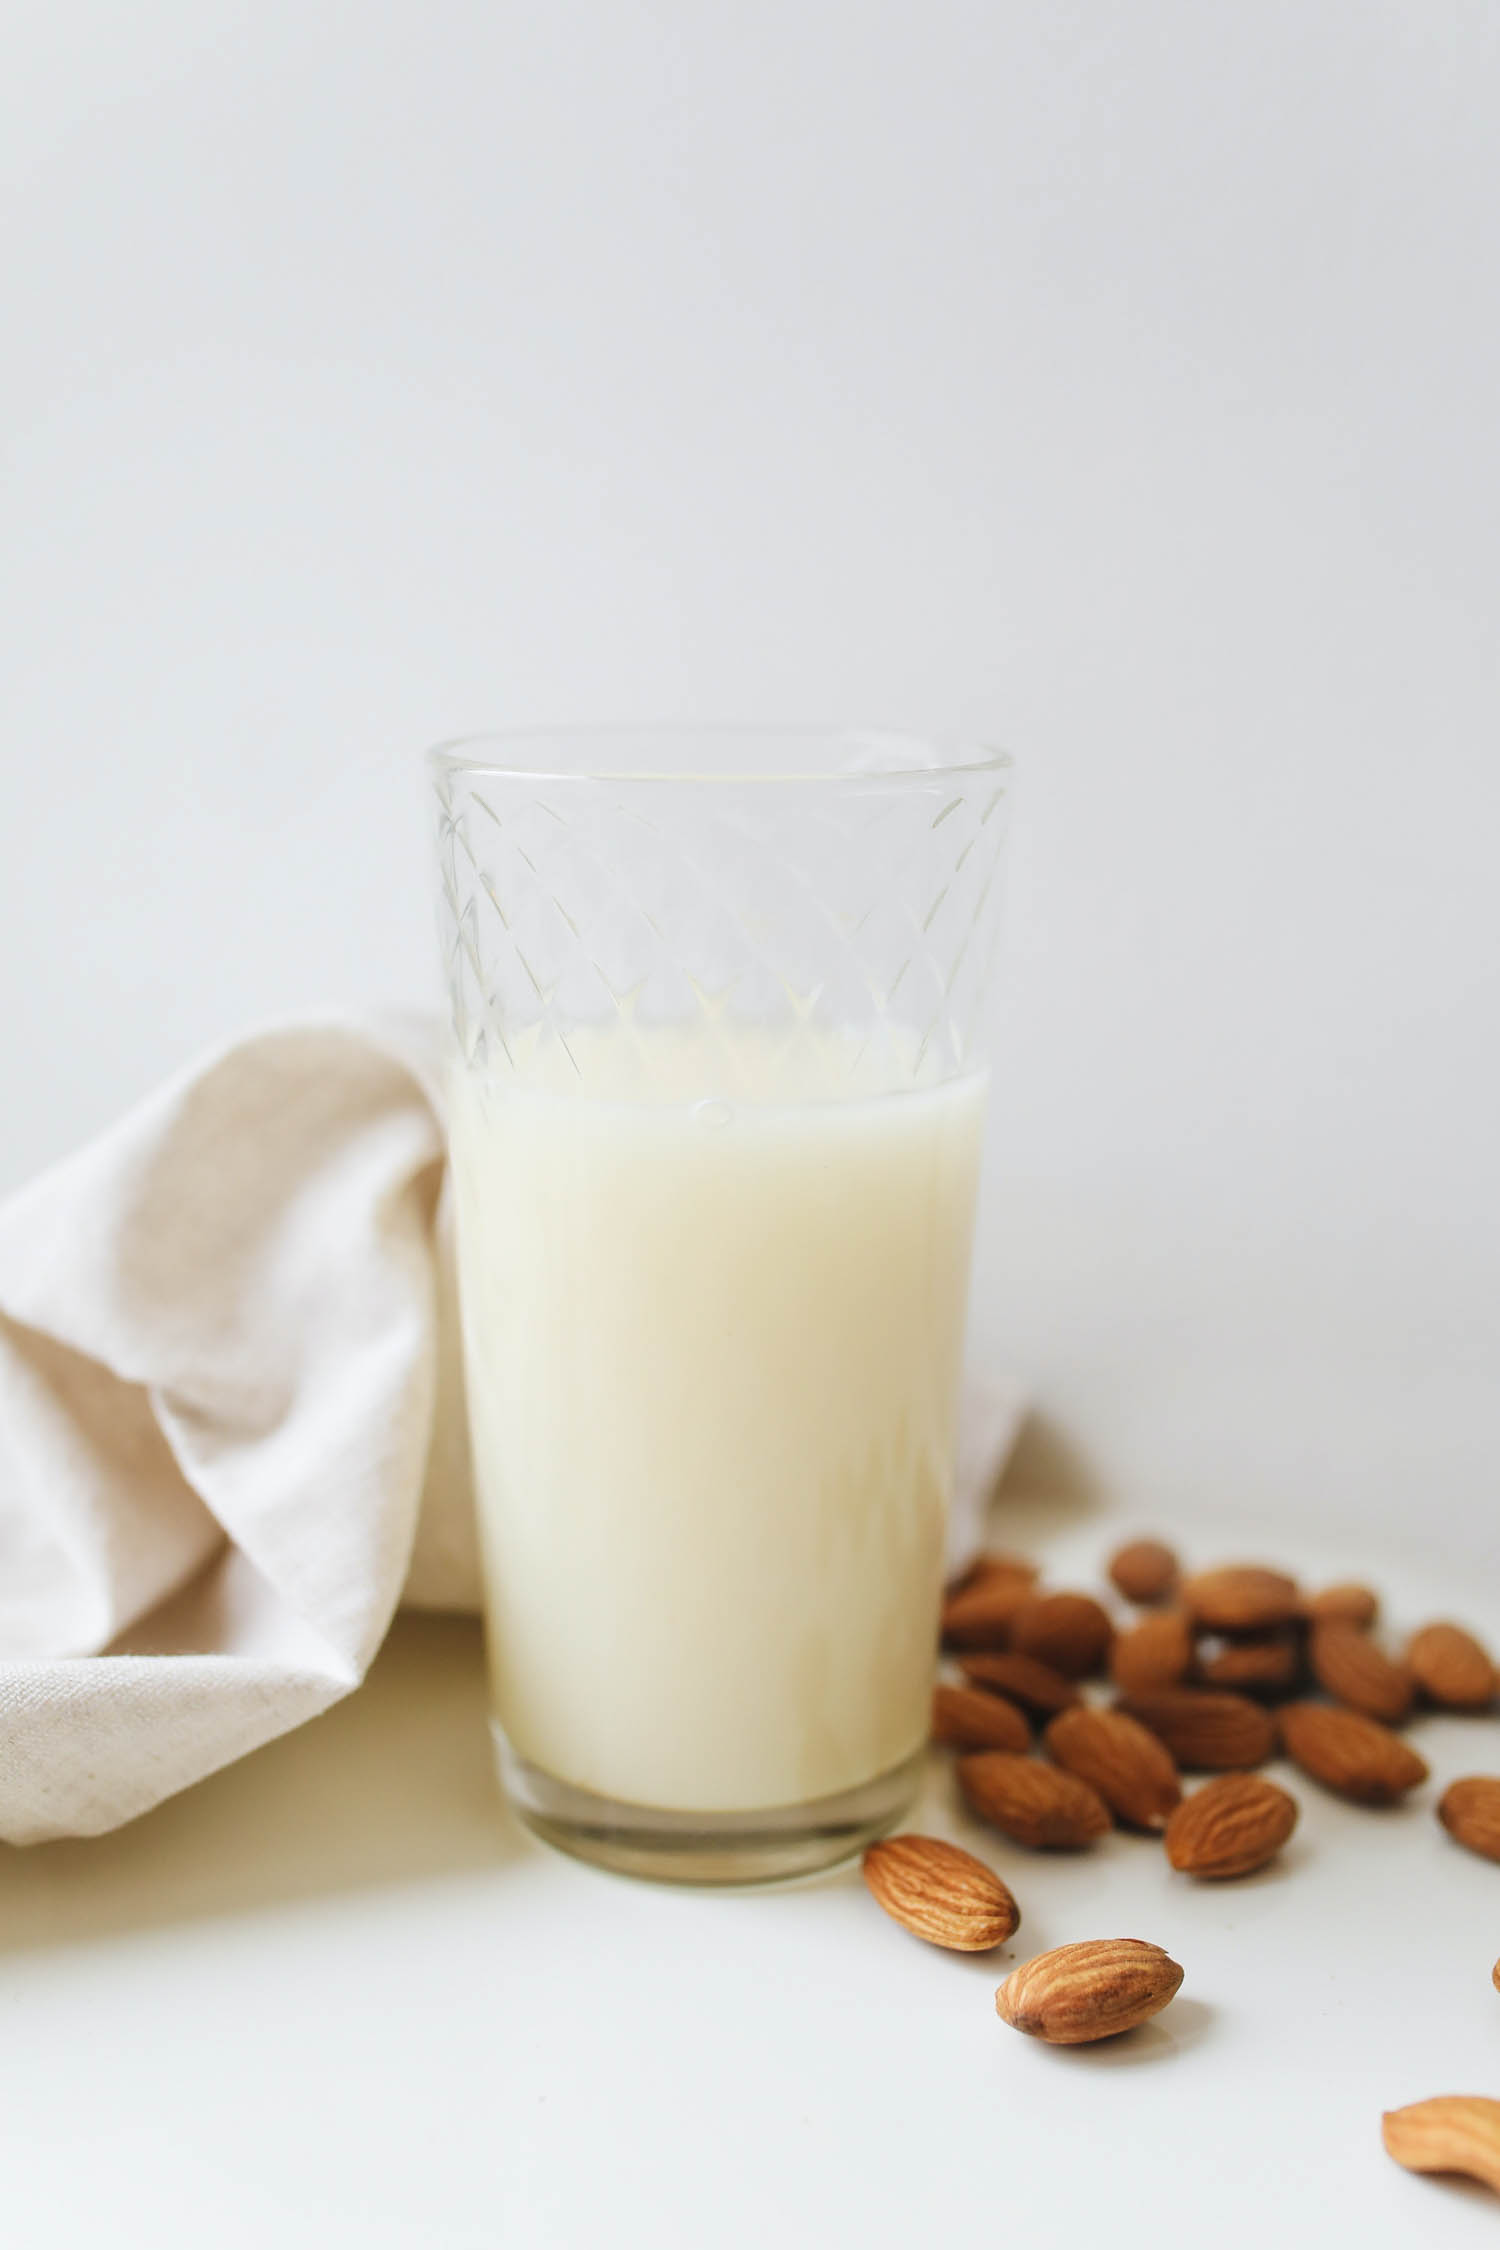 Homemade almond milk in a glass with almonds next to it